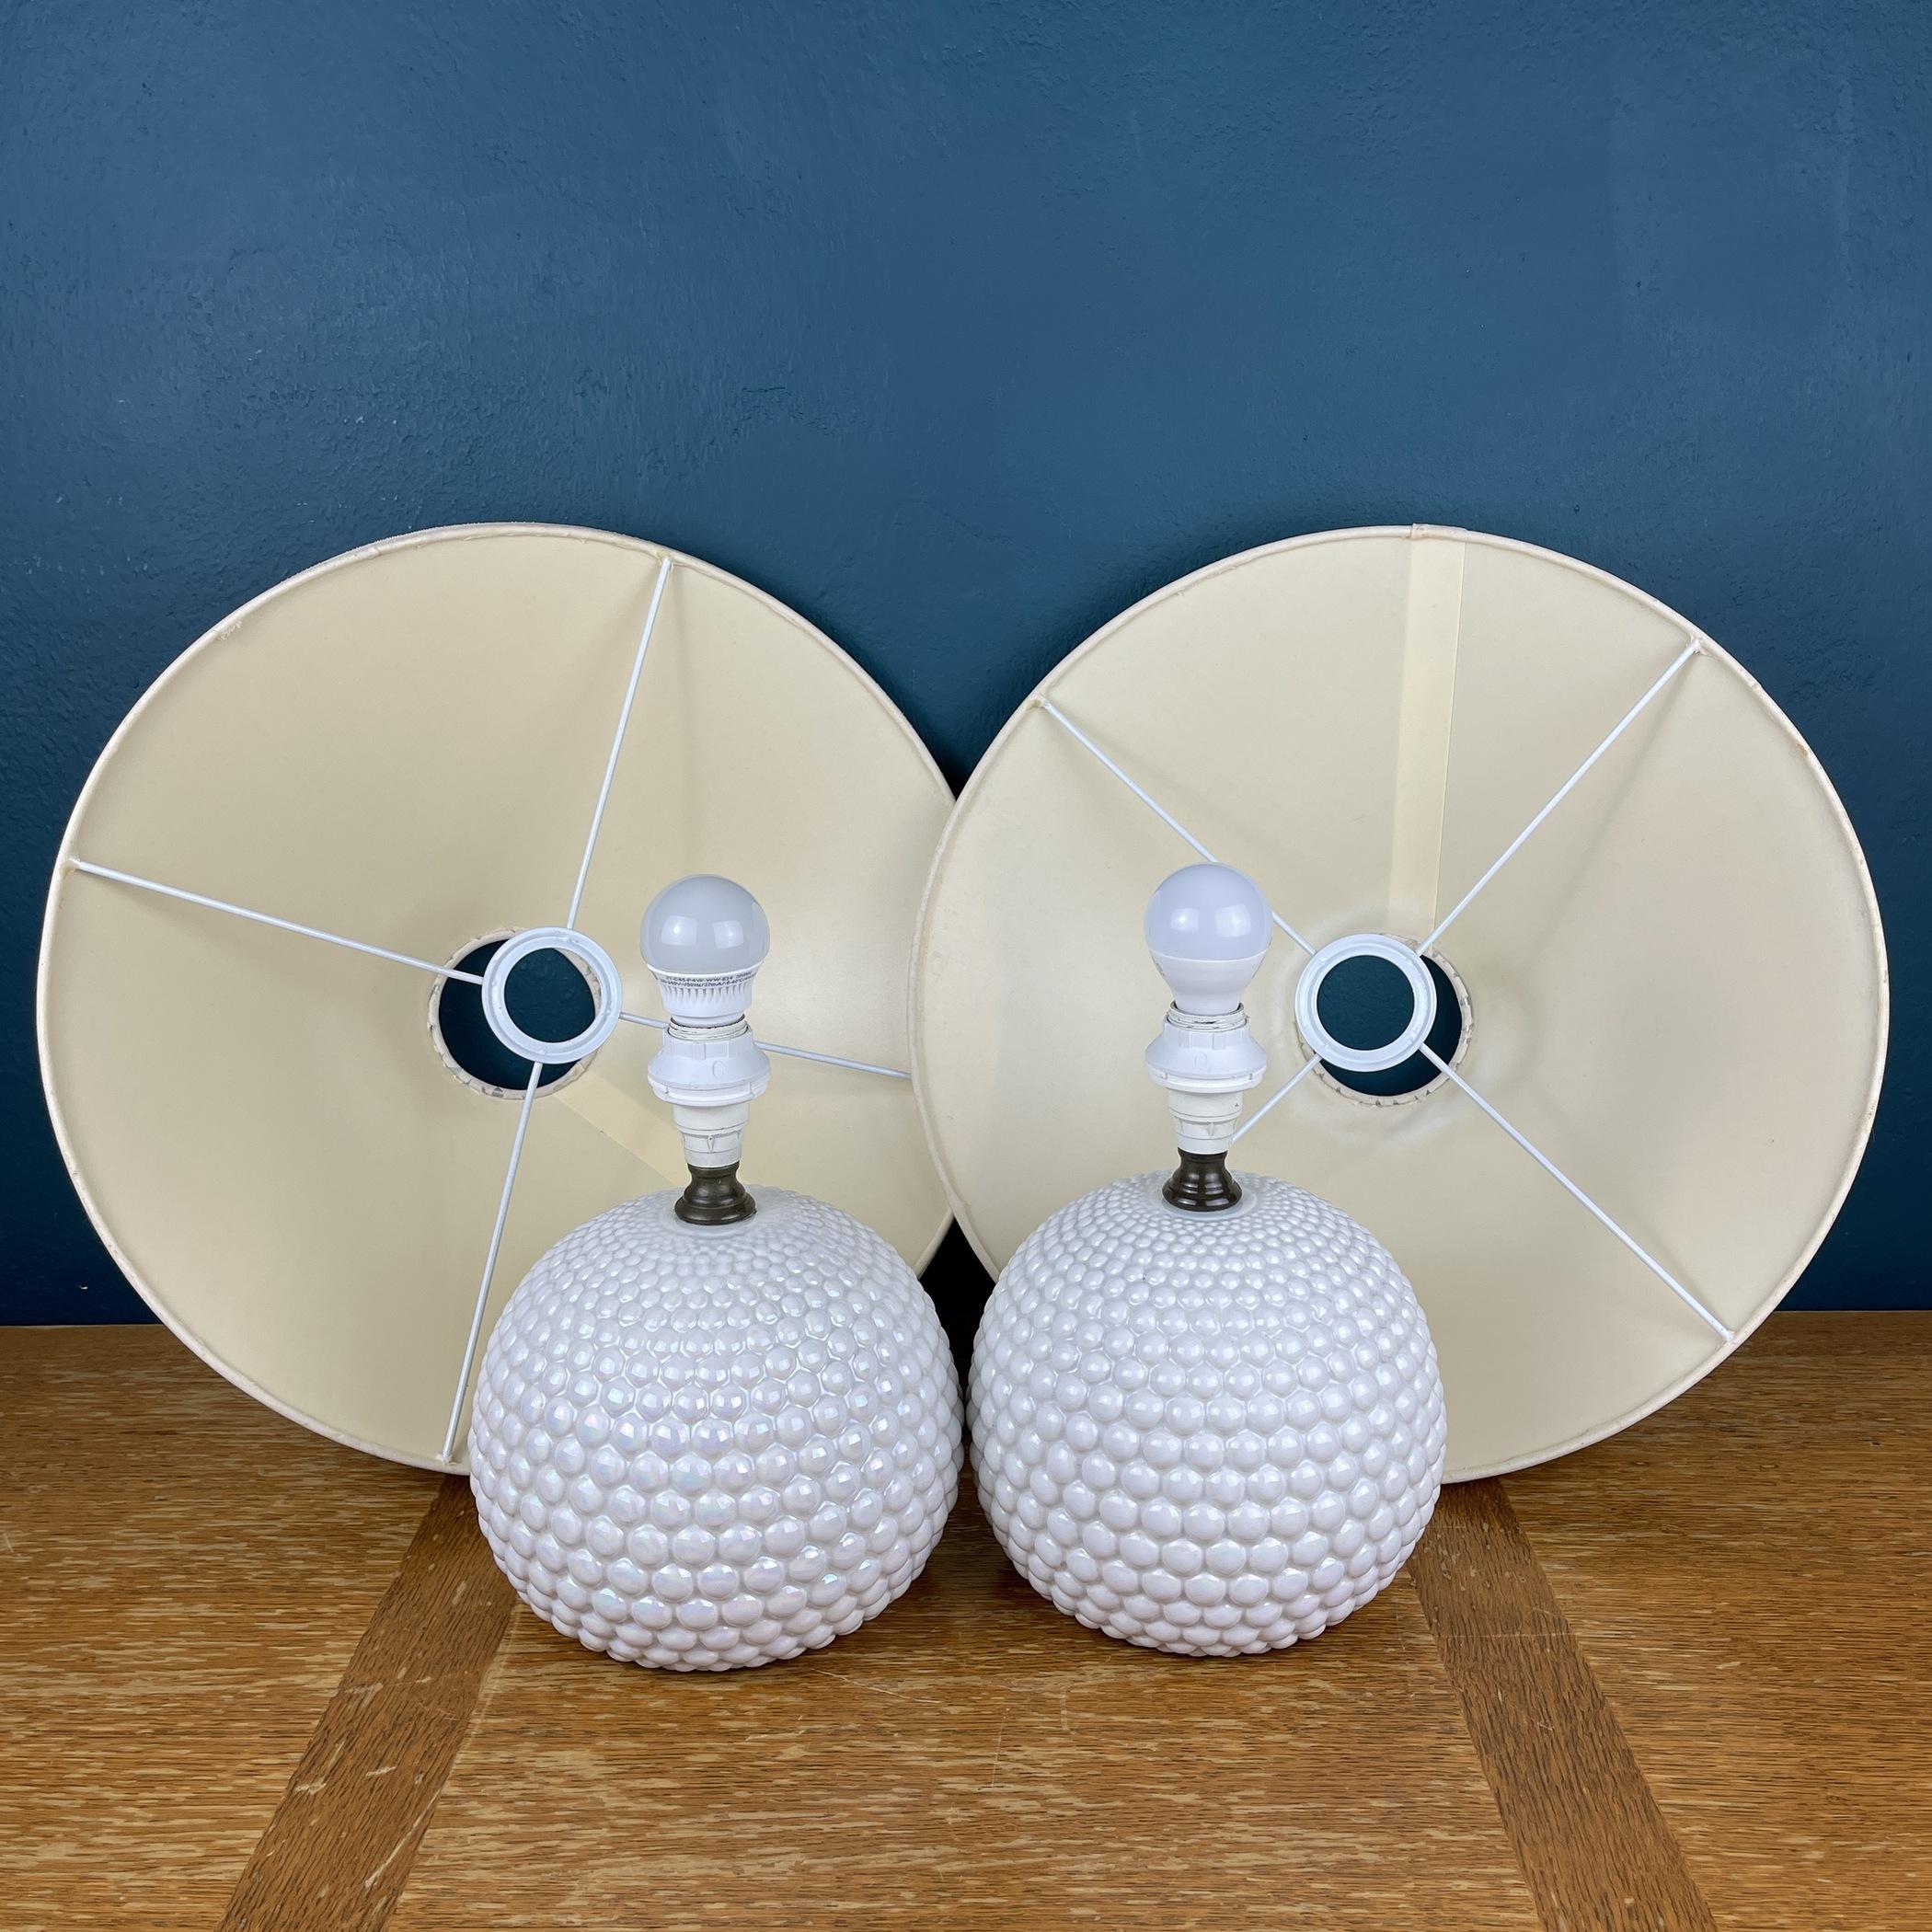 Pair of Ceramic Table Lamps, Italy, 1970s For Sale 3